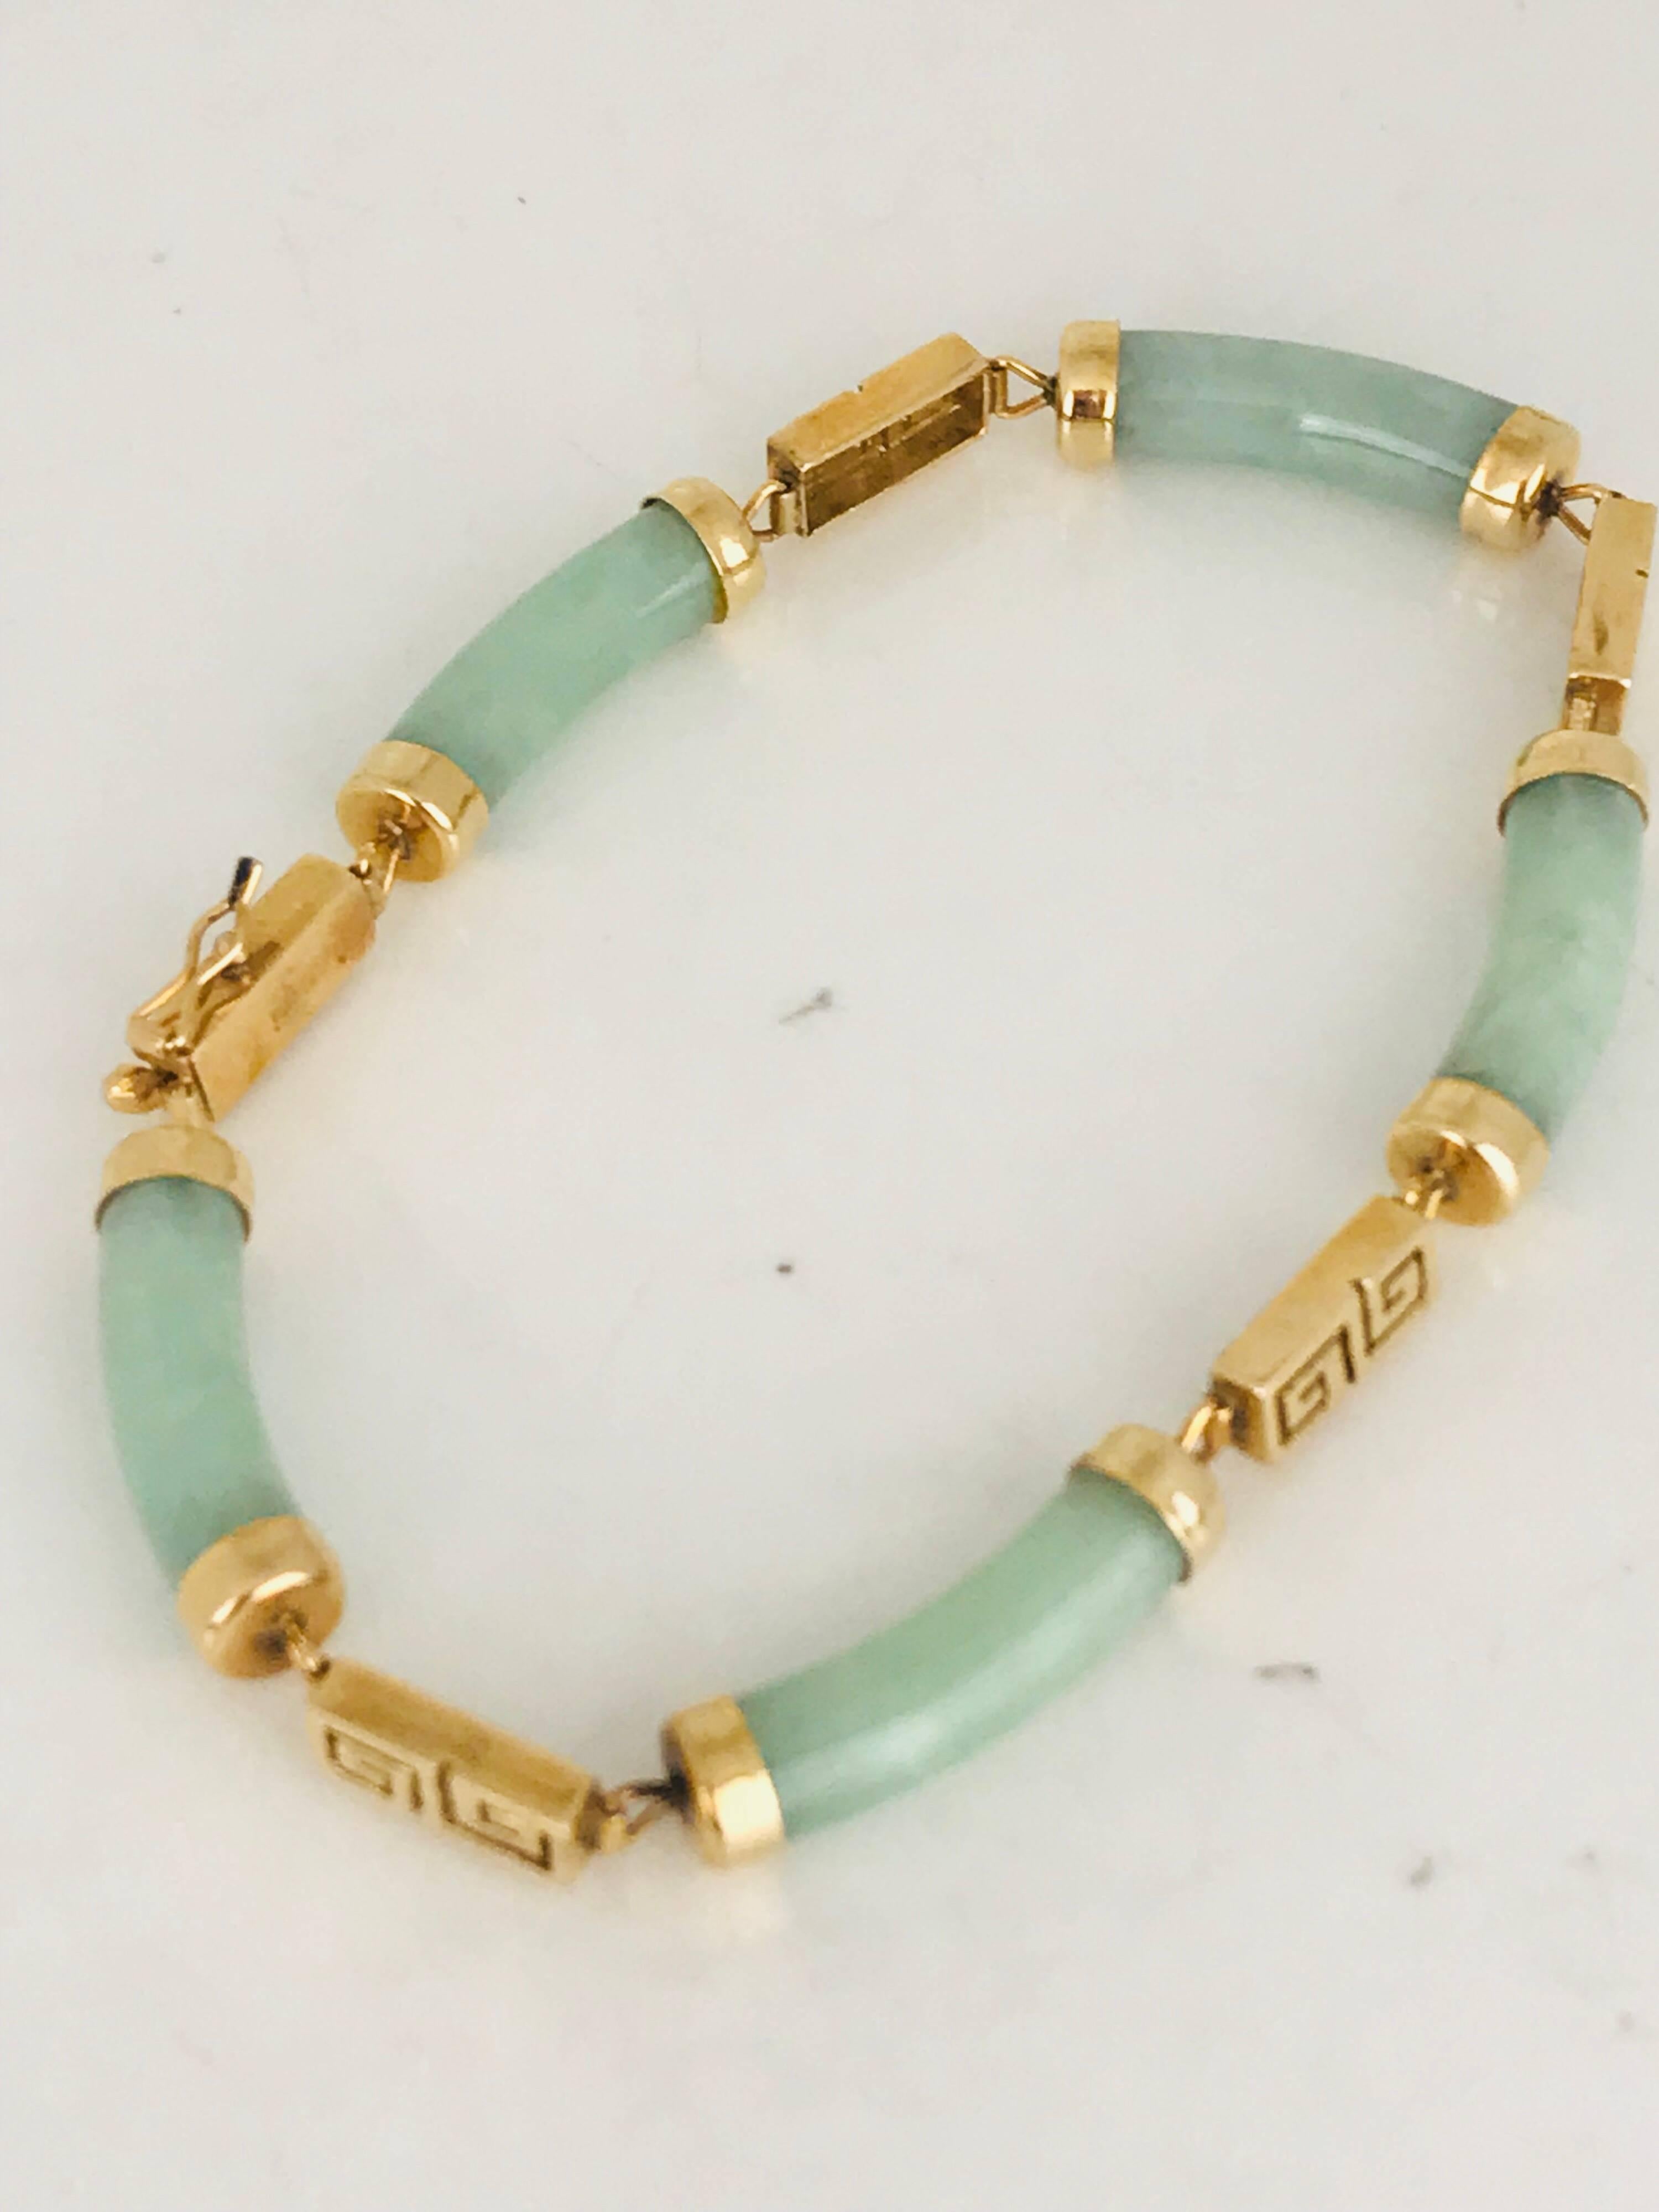 Green Jade, Greek Key Symbol, 14 karat yellow Gold Link Bracelet features polished, curved, cylindrical light green jade links with gold end caps, alternating with rectangular, Greek key-style links.  

Box clasp has a safety clip.

Bracelet